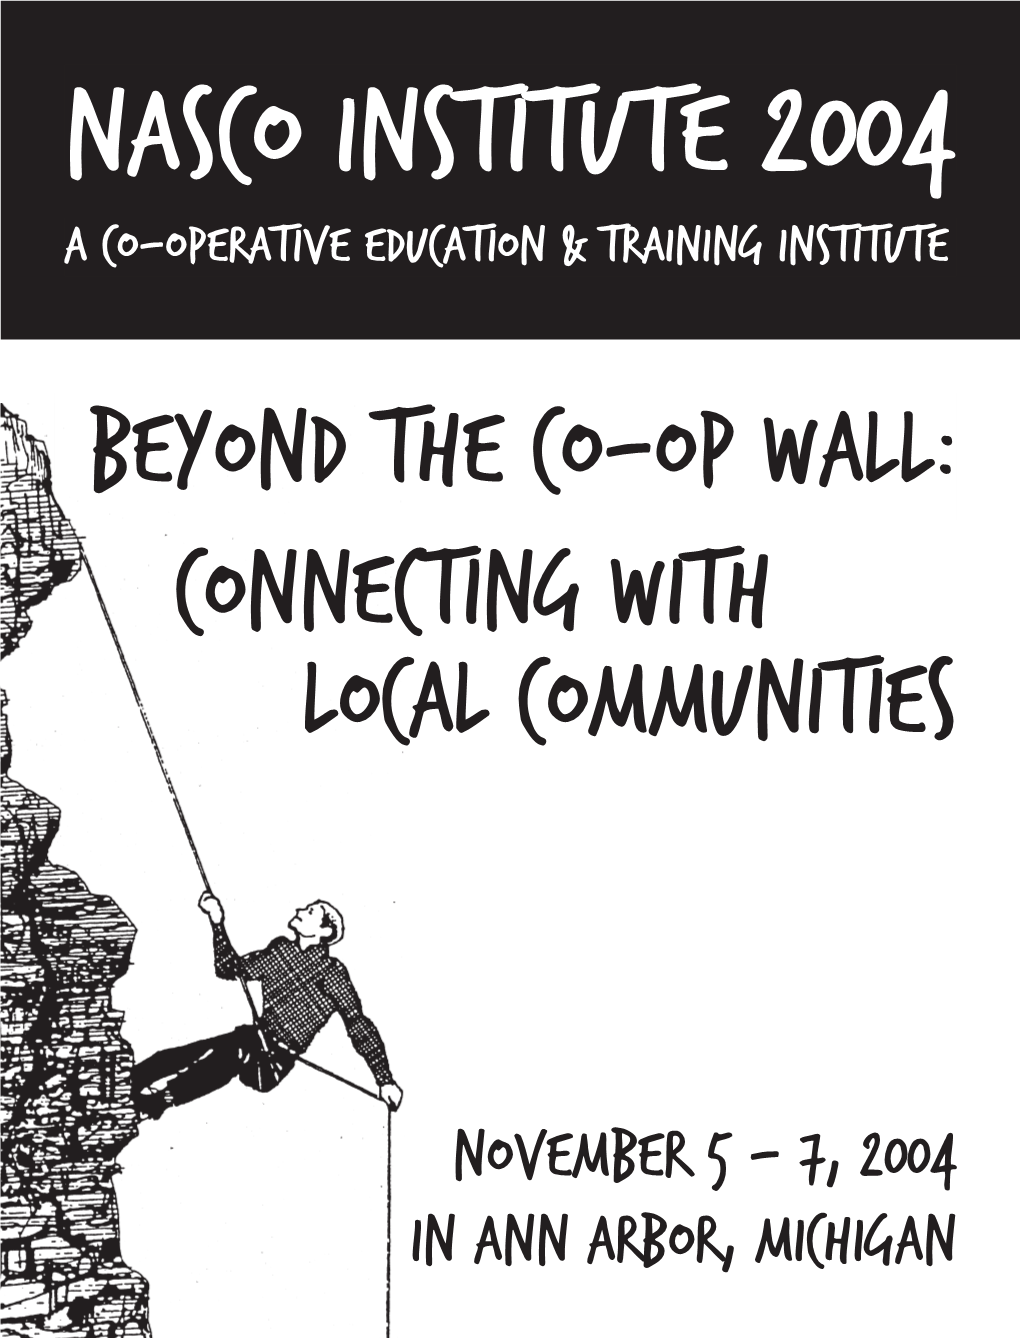 Beyond the Co-Op Wall: Connecting with Local Communities